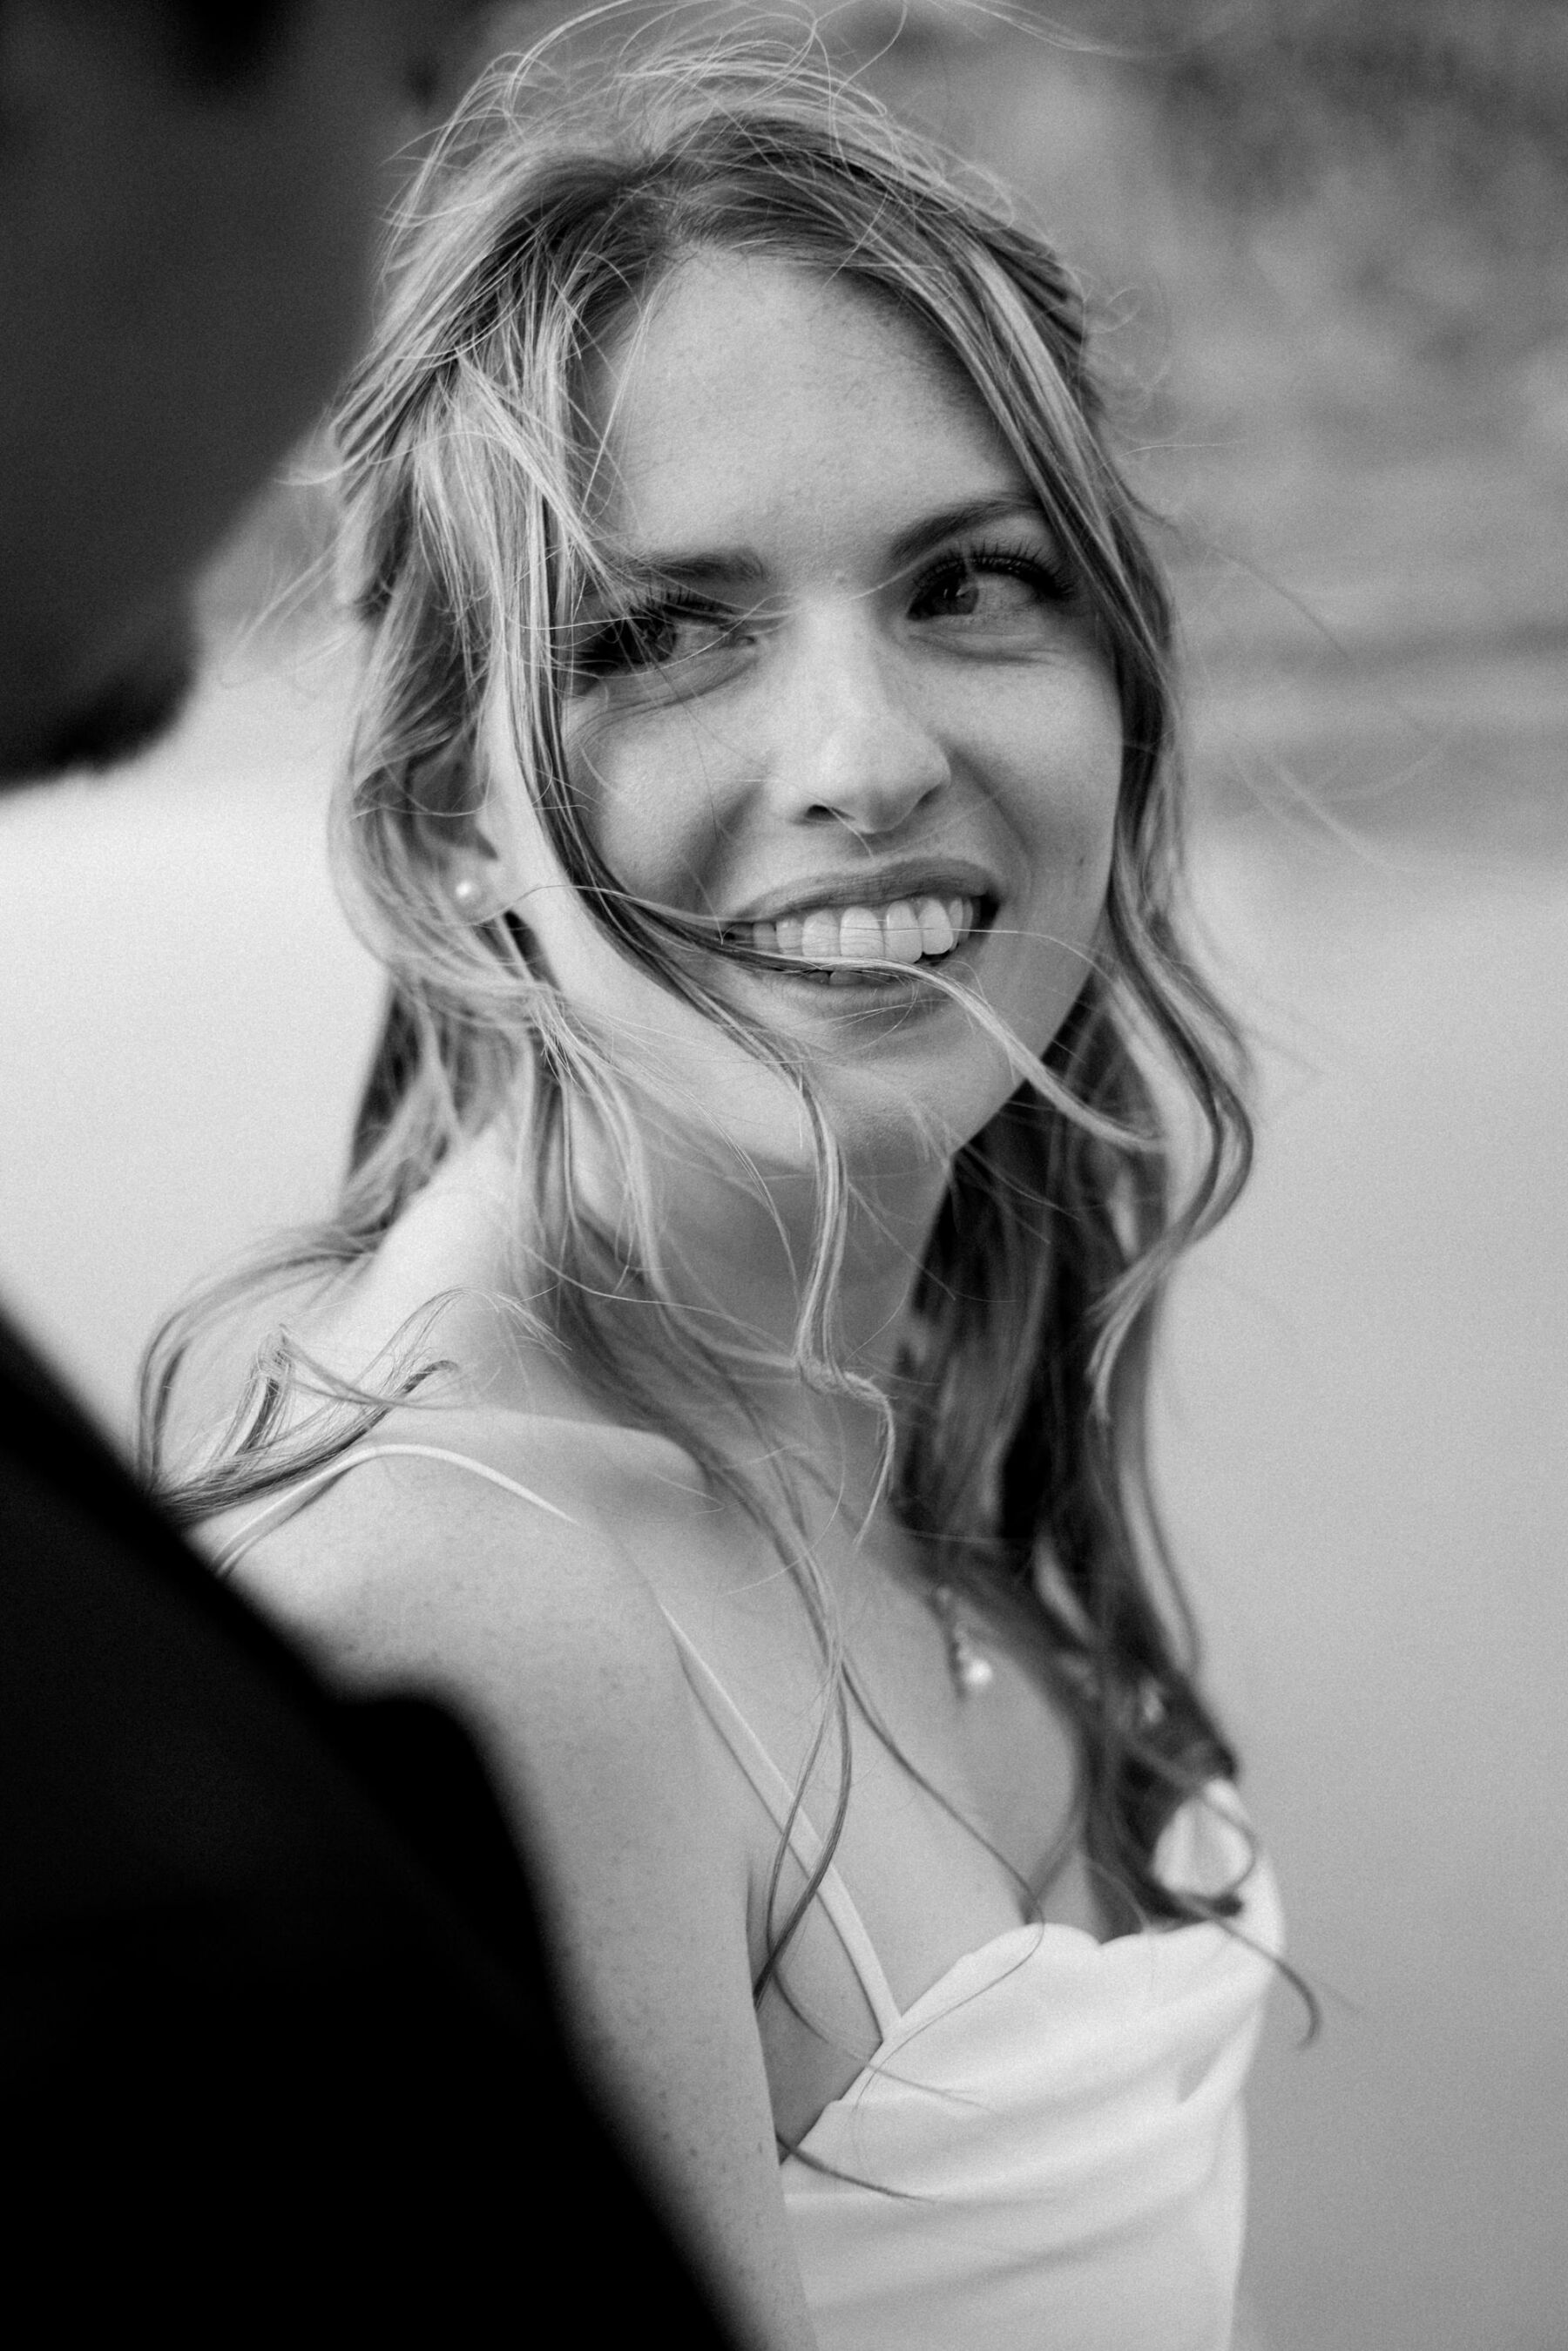 Black and white shot of bride with windswept hair gazing lovingly at her groom.